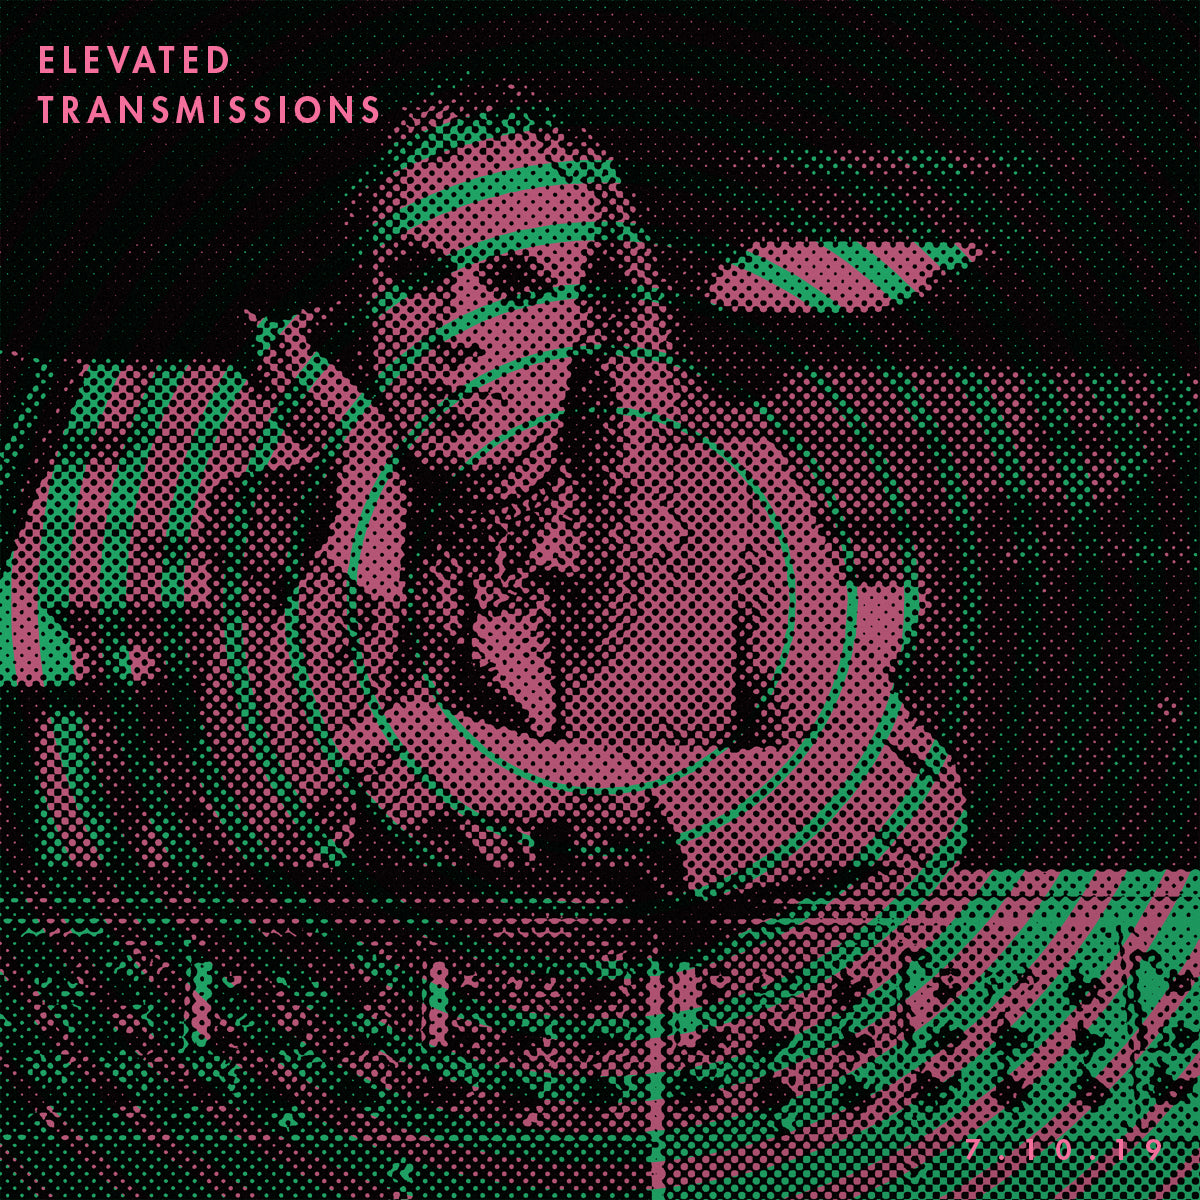 ELEVATED TRANSMISSIONS | 7.10.19